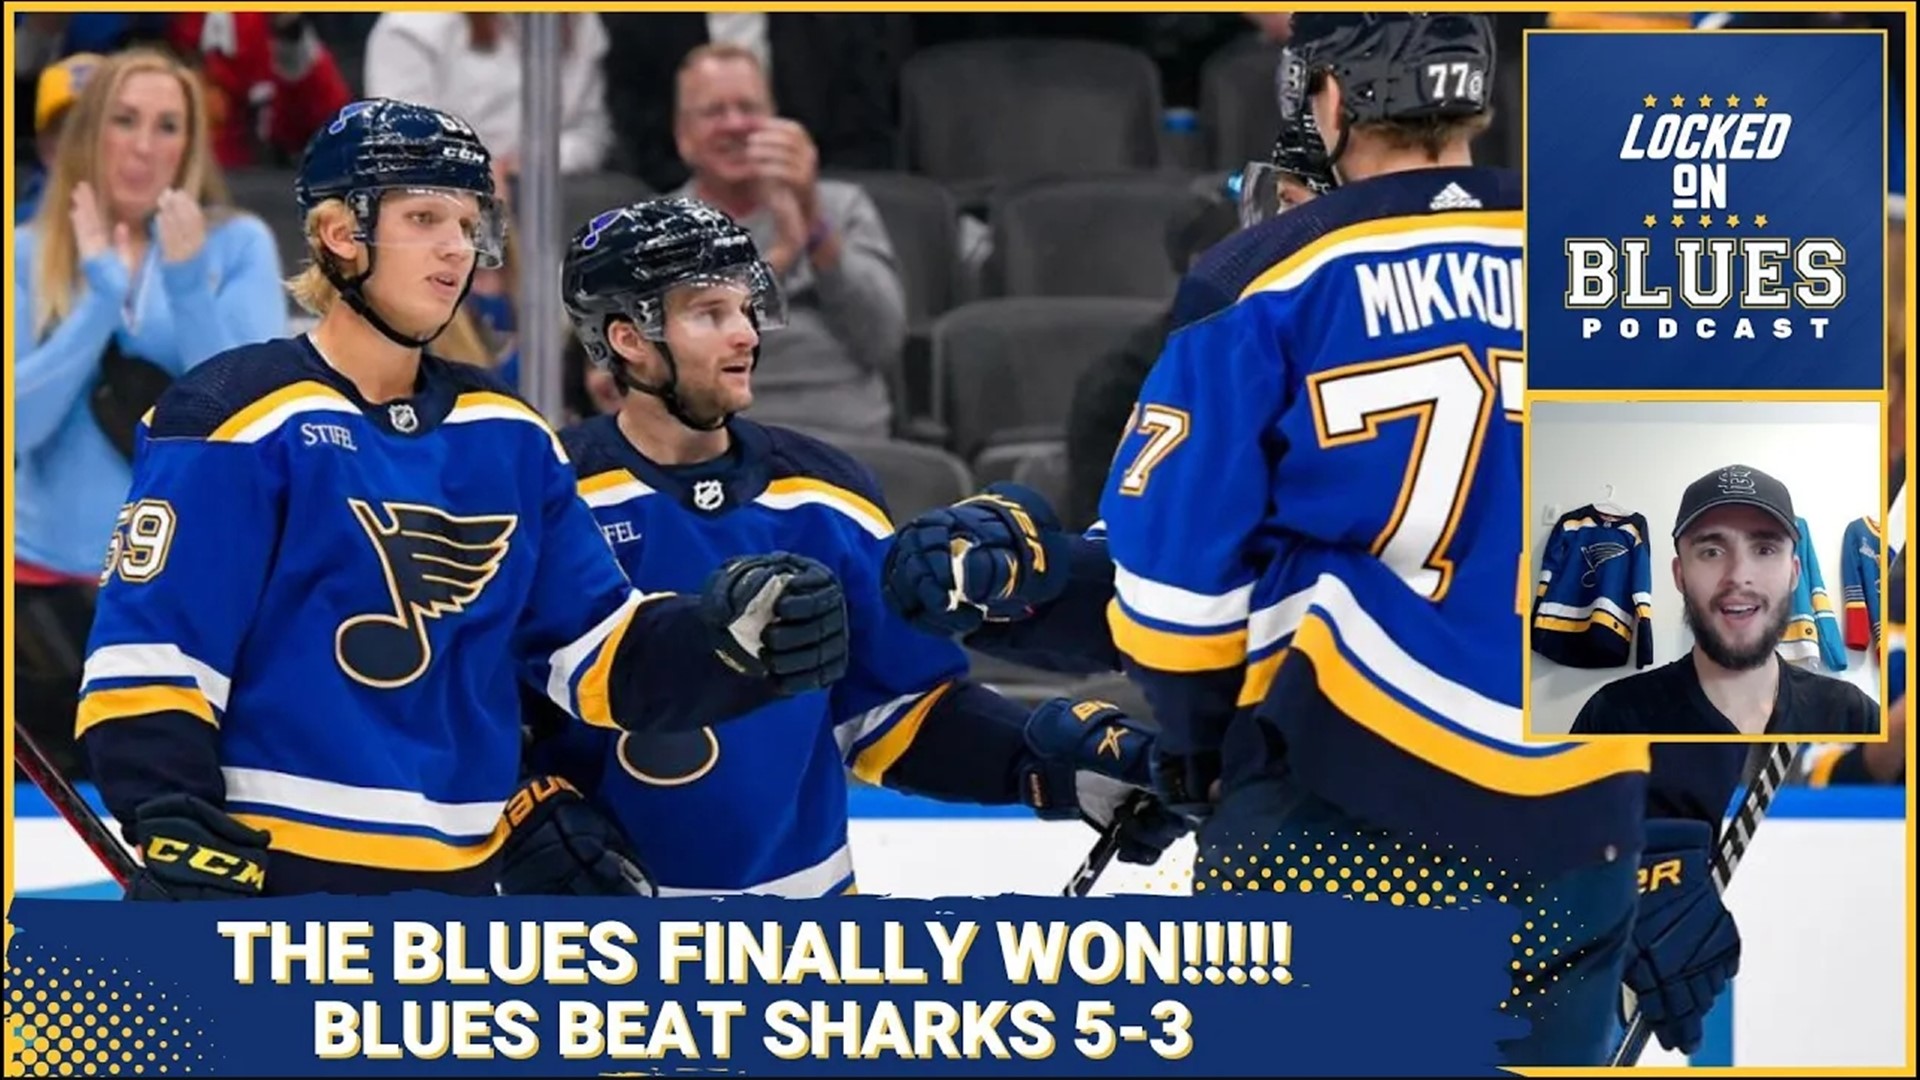 Josh Hyman covers the Blues victory over the San Jose sharks. This ends the losing streak.